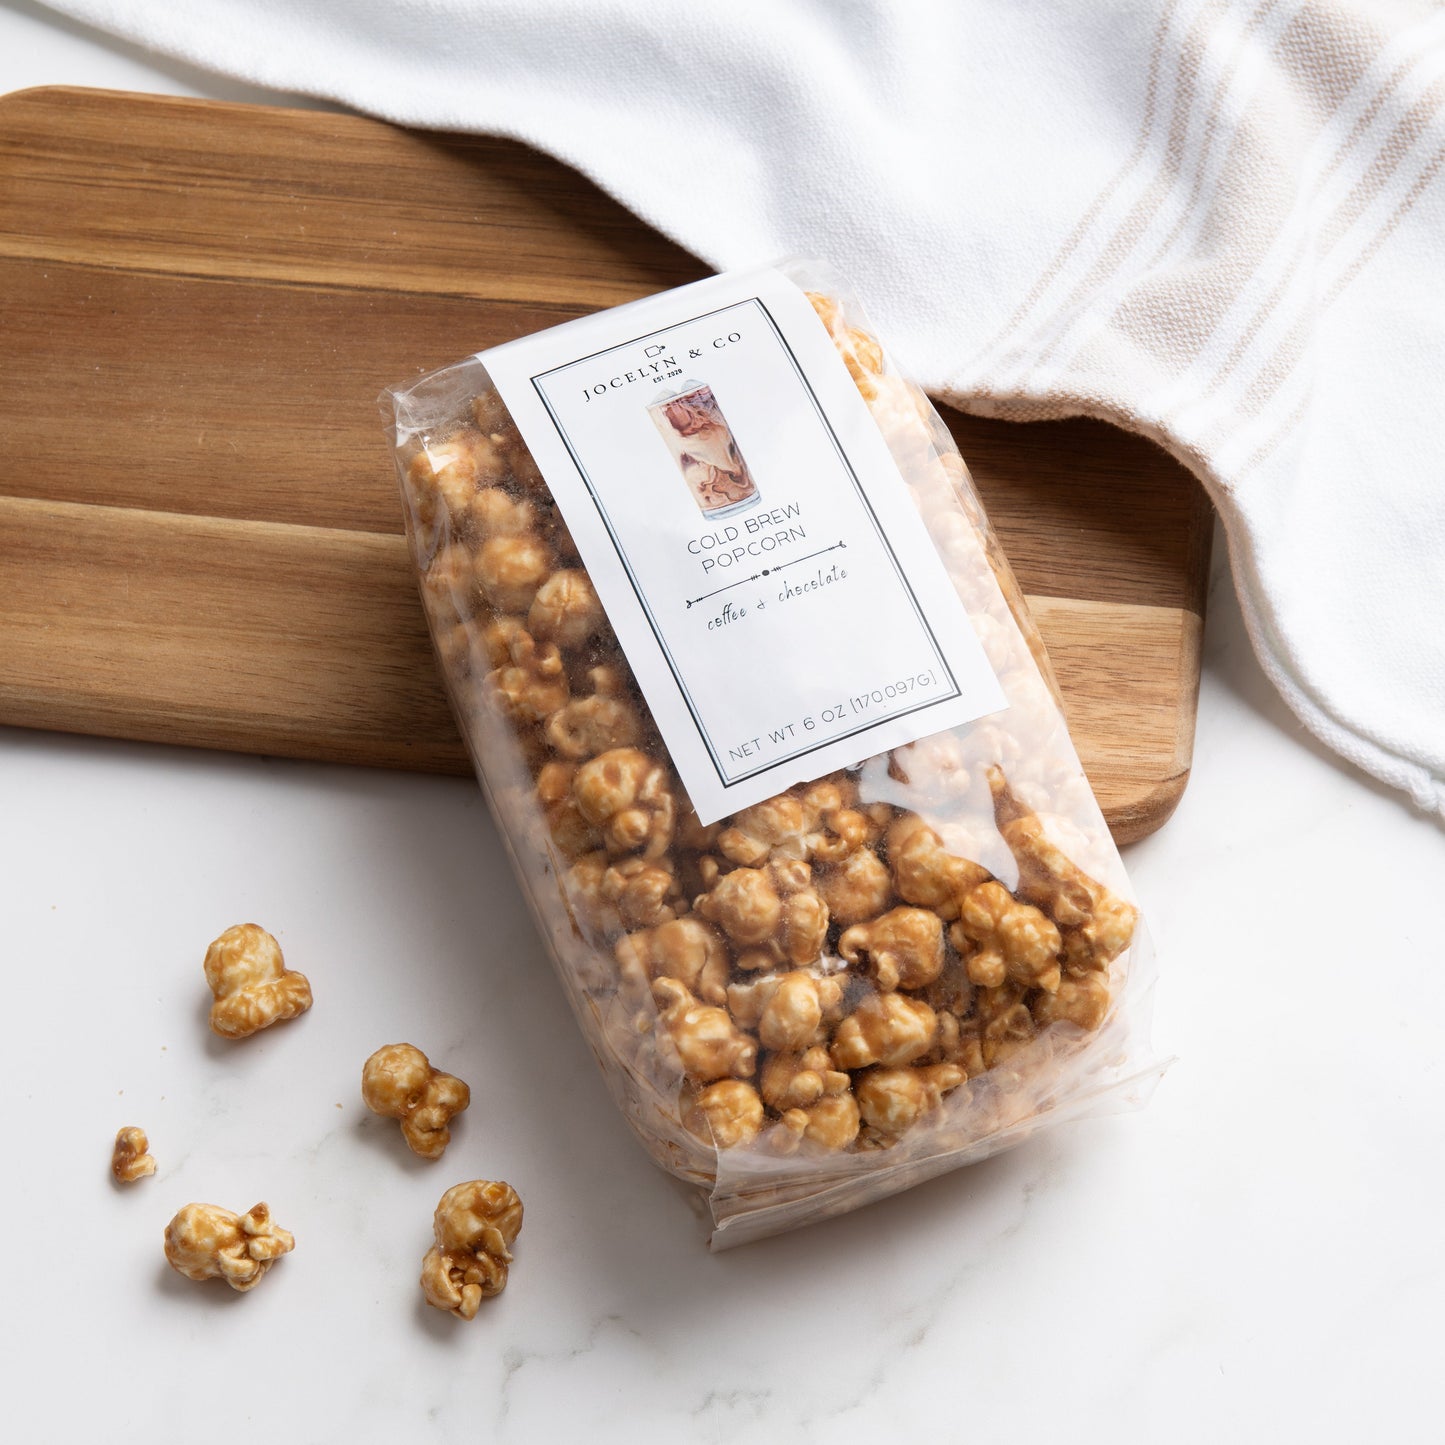 Private Label Packaging Only for Cold Brew Popcorn-250